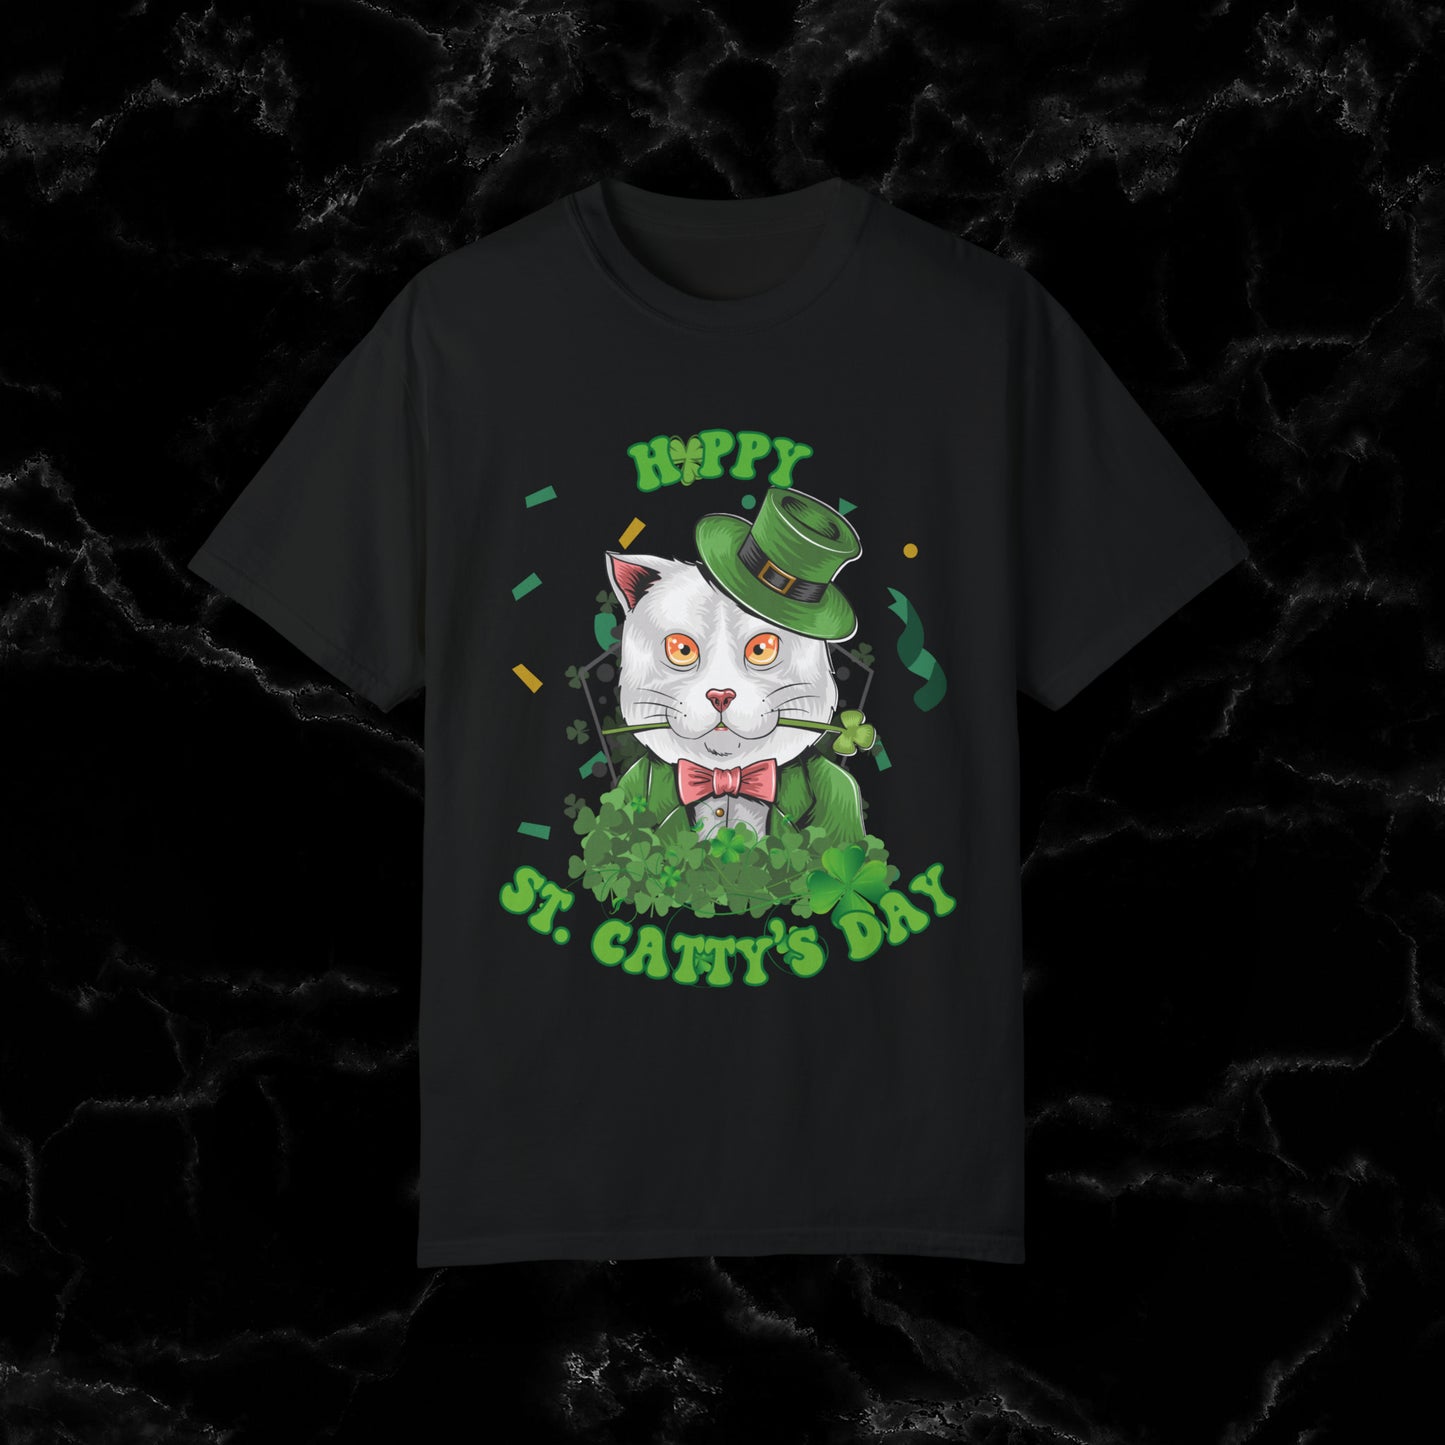 Happy St. Catty's Day Funny St. Patrick's Day Comfort Colors T-Shirt - St. Paddy's Day Shirt for Cat Lover St. Patty's Day Fun T-Shirt Black S 